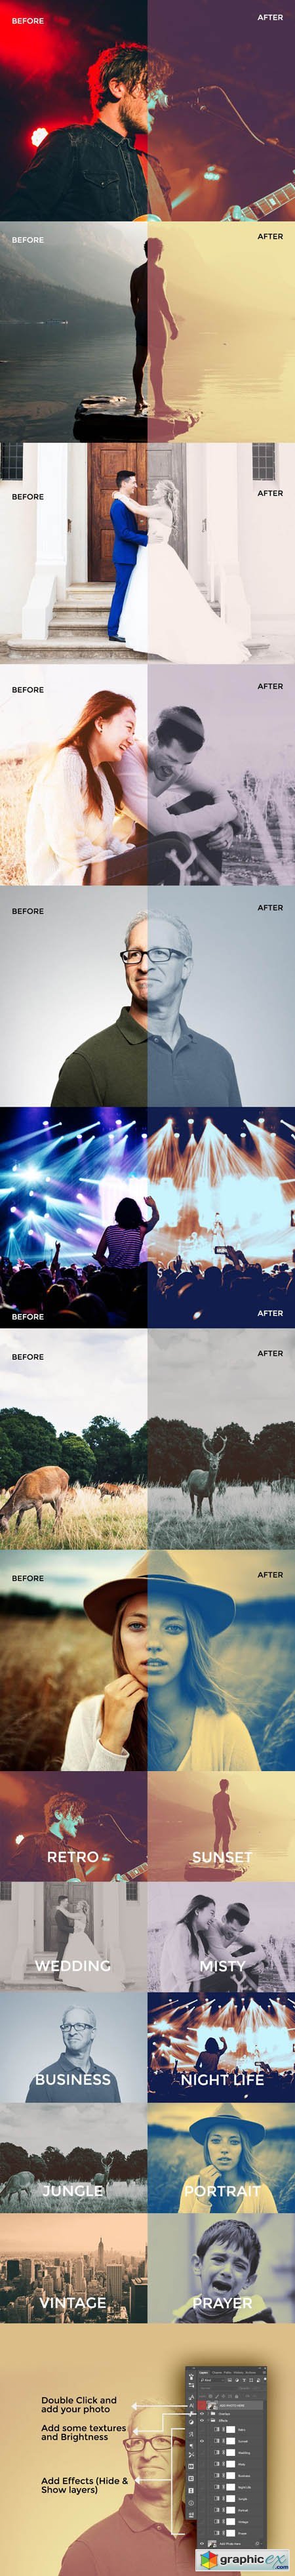 10 Photo Effects PSD Templates